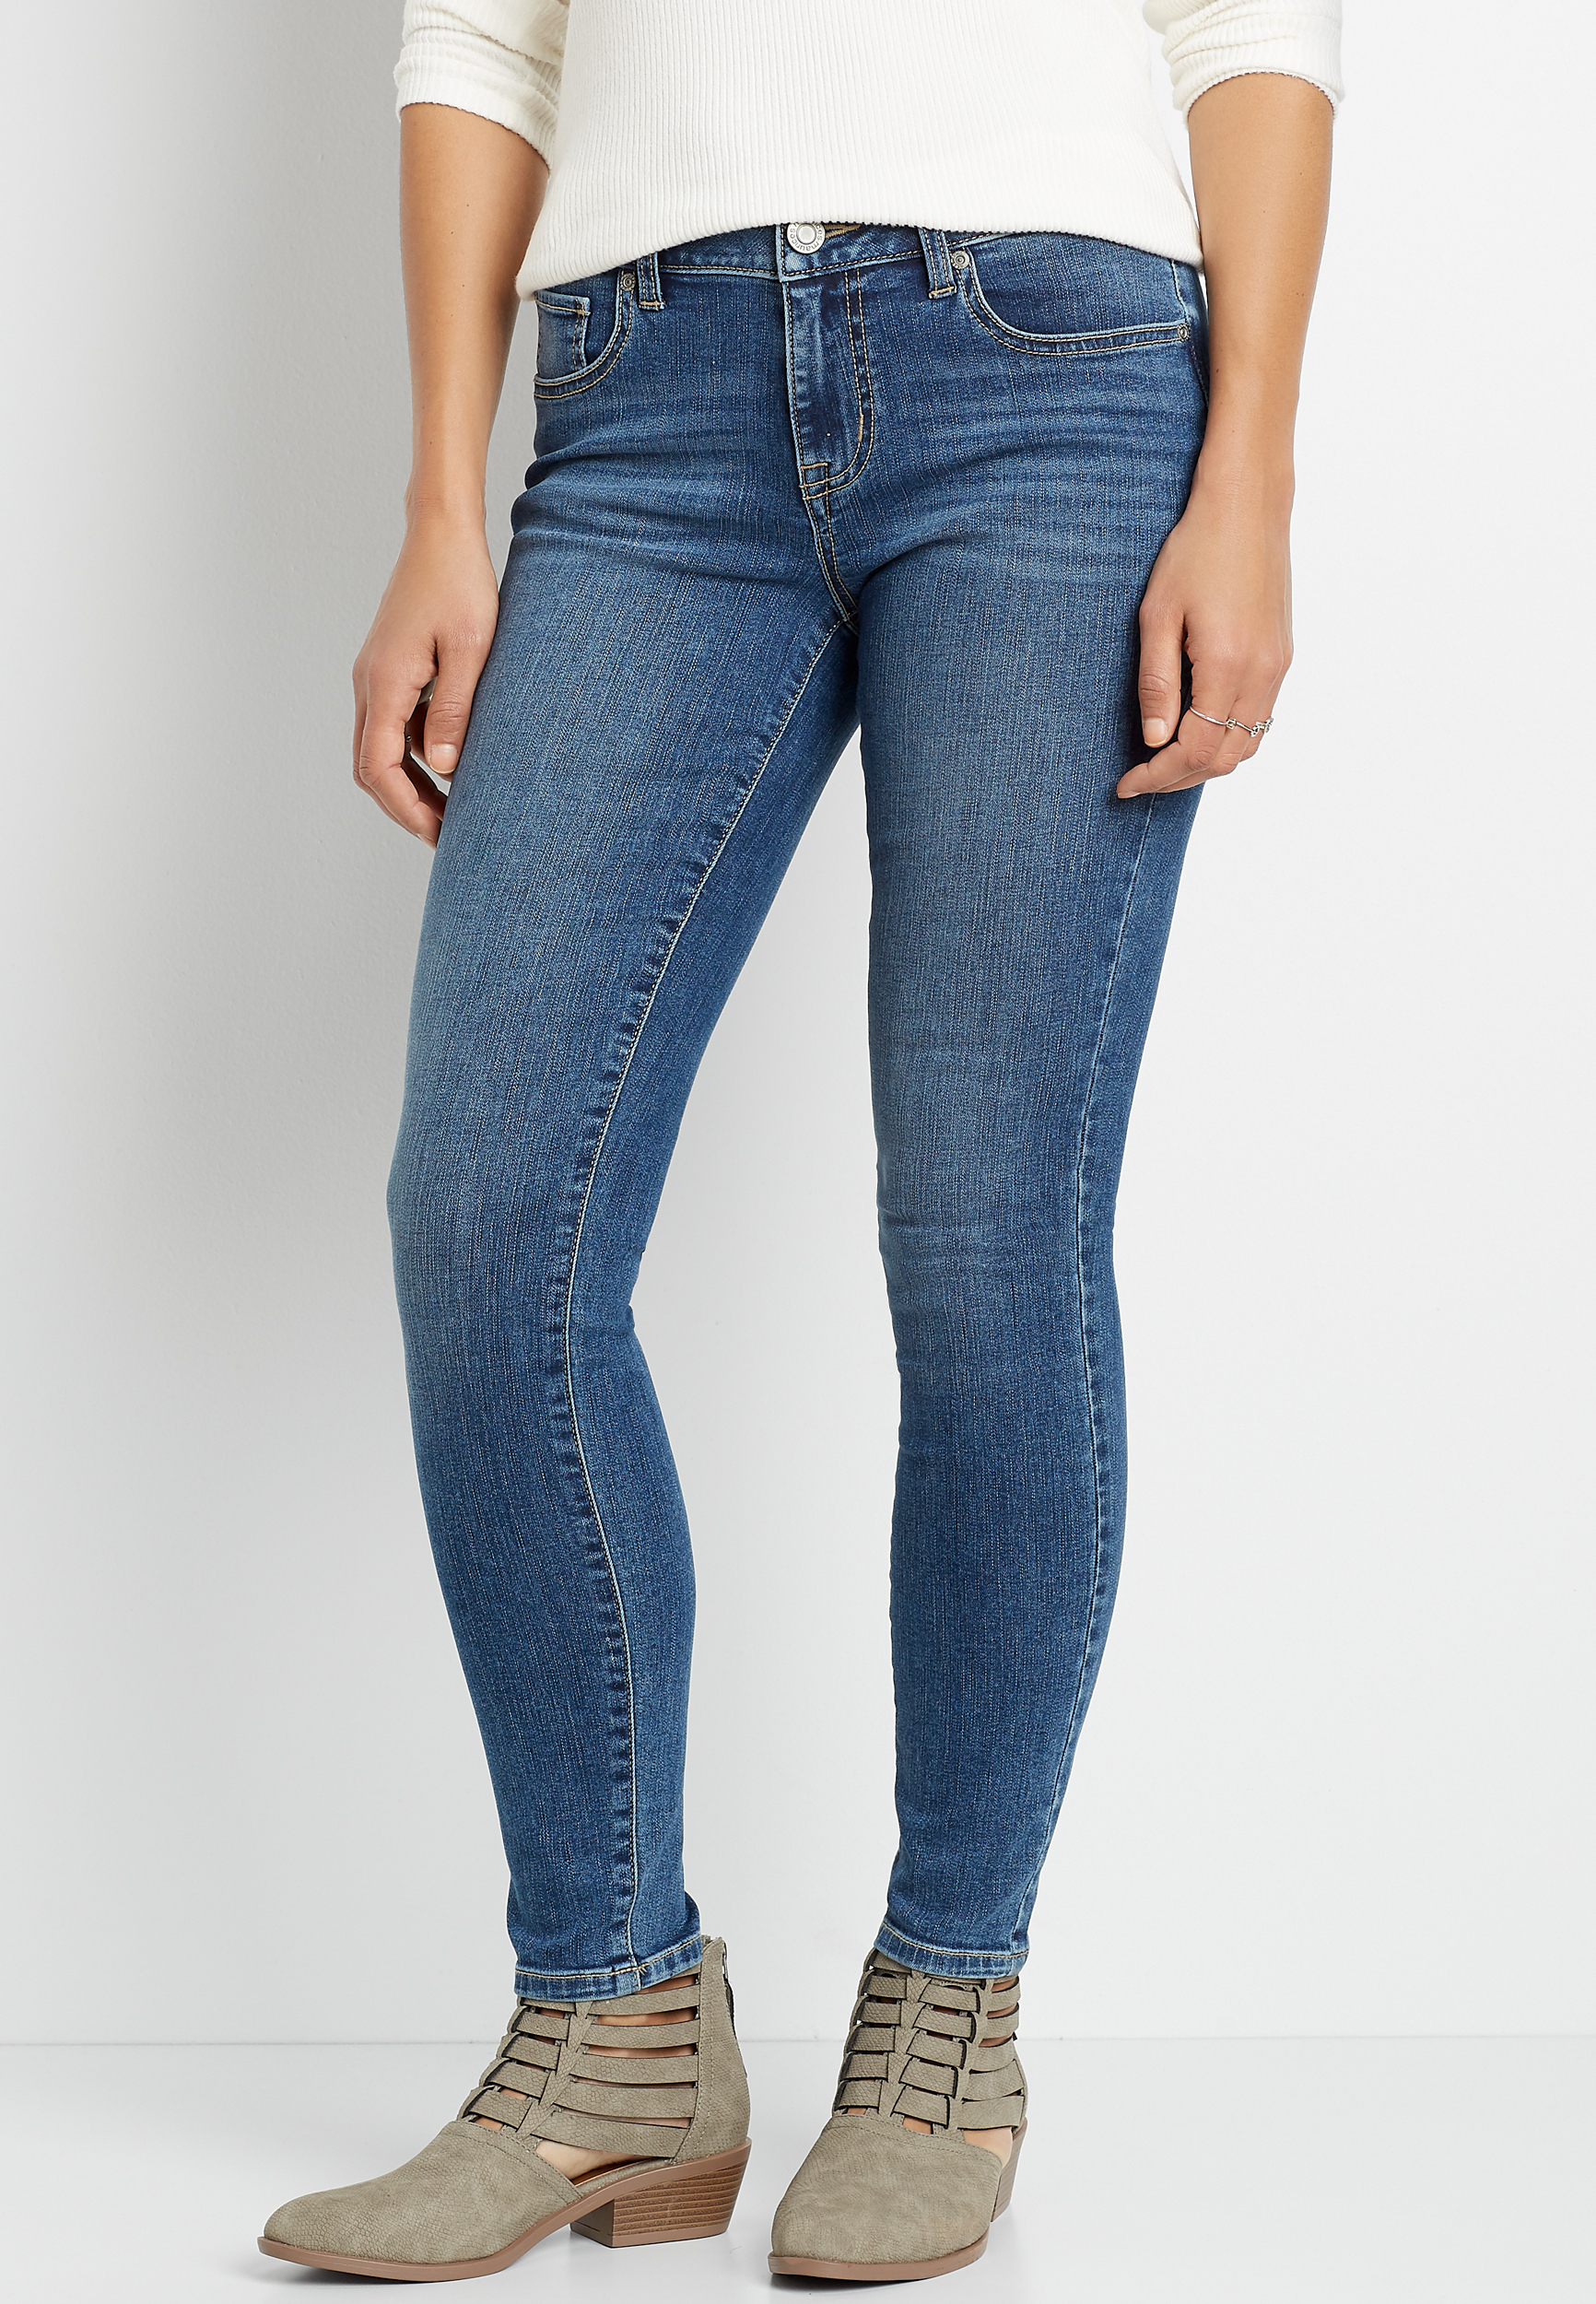 maurices jeans price